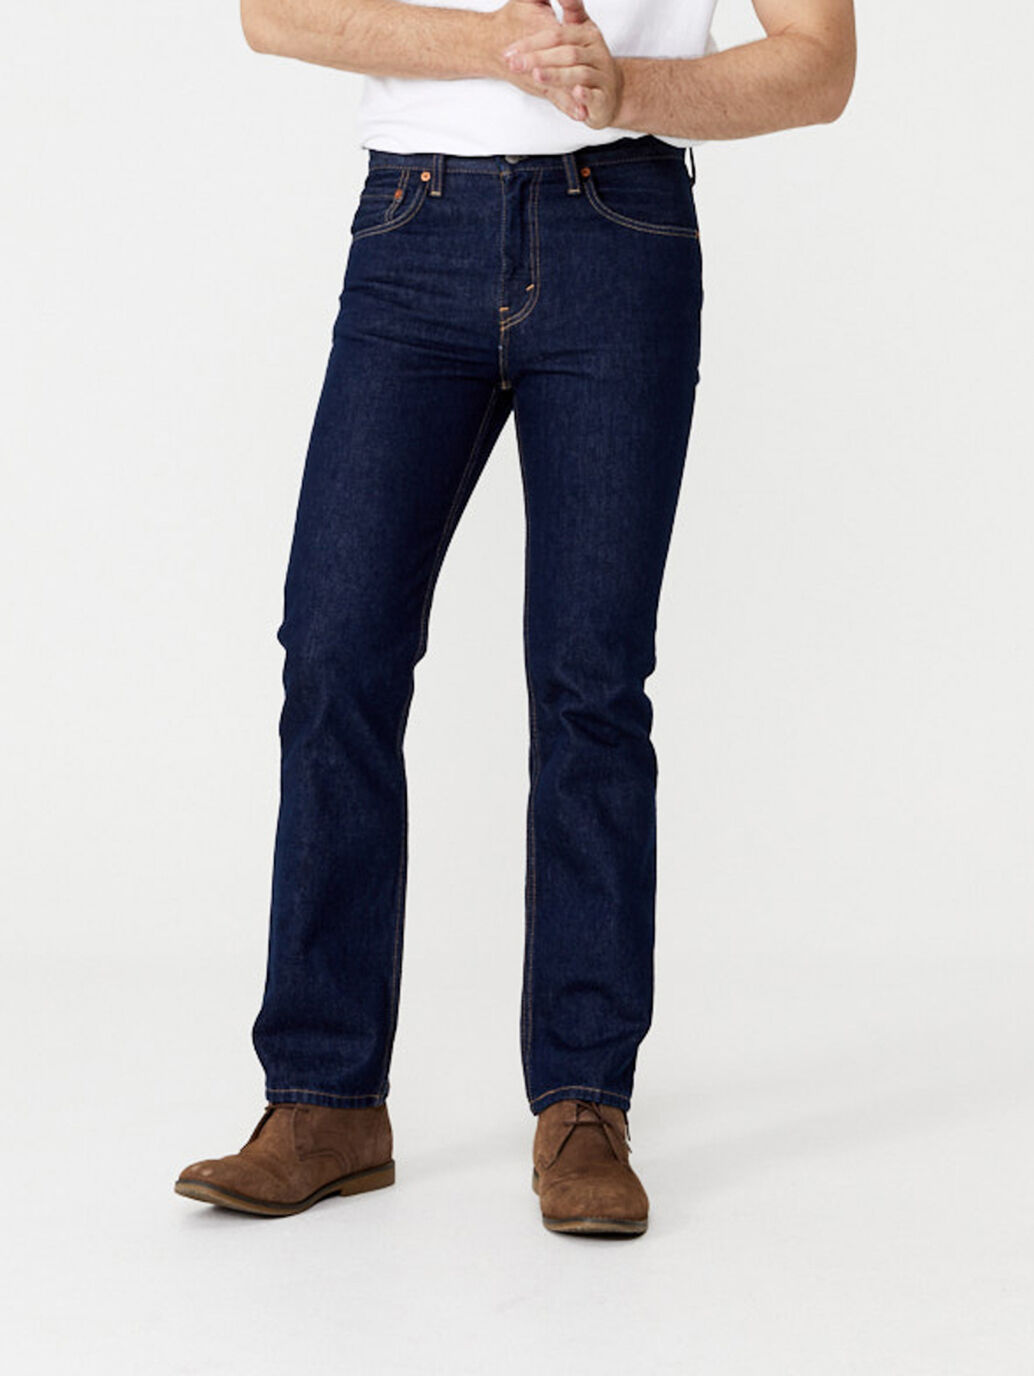 levis 516 replacement